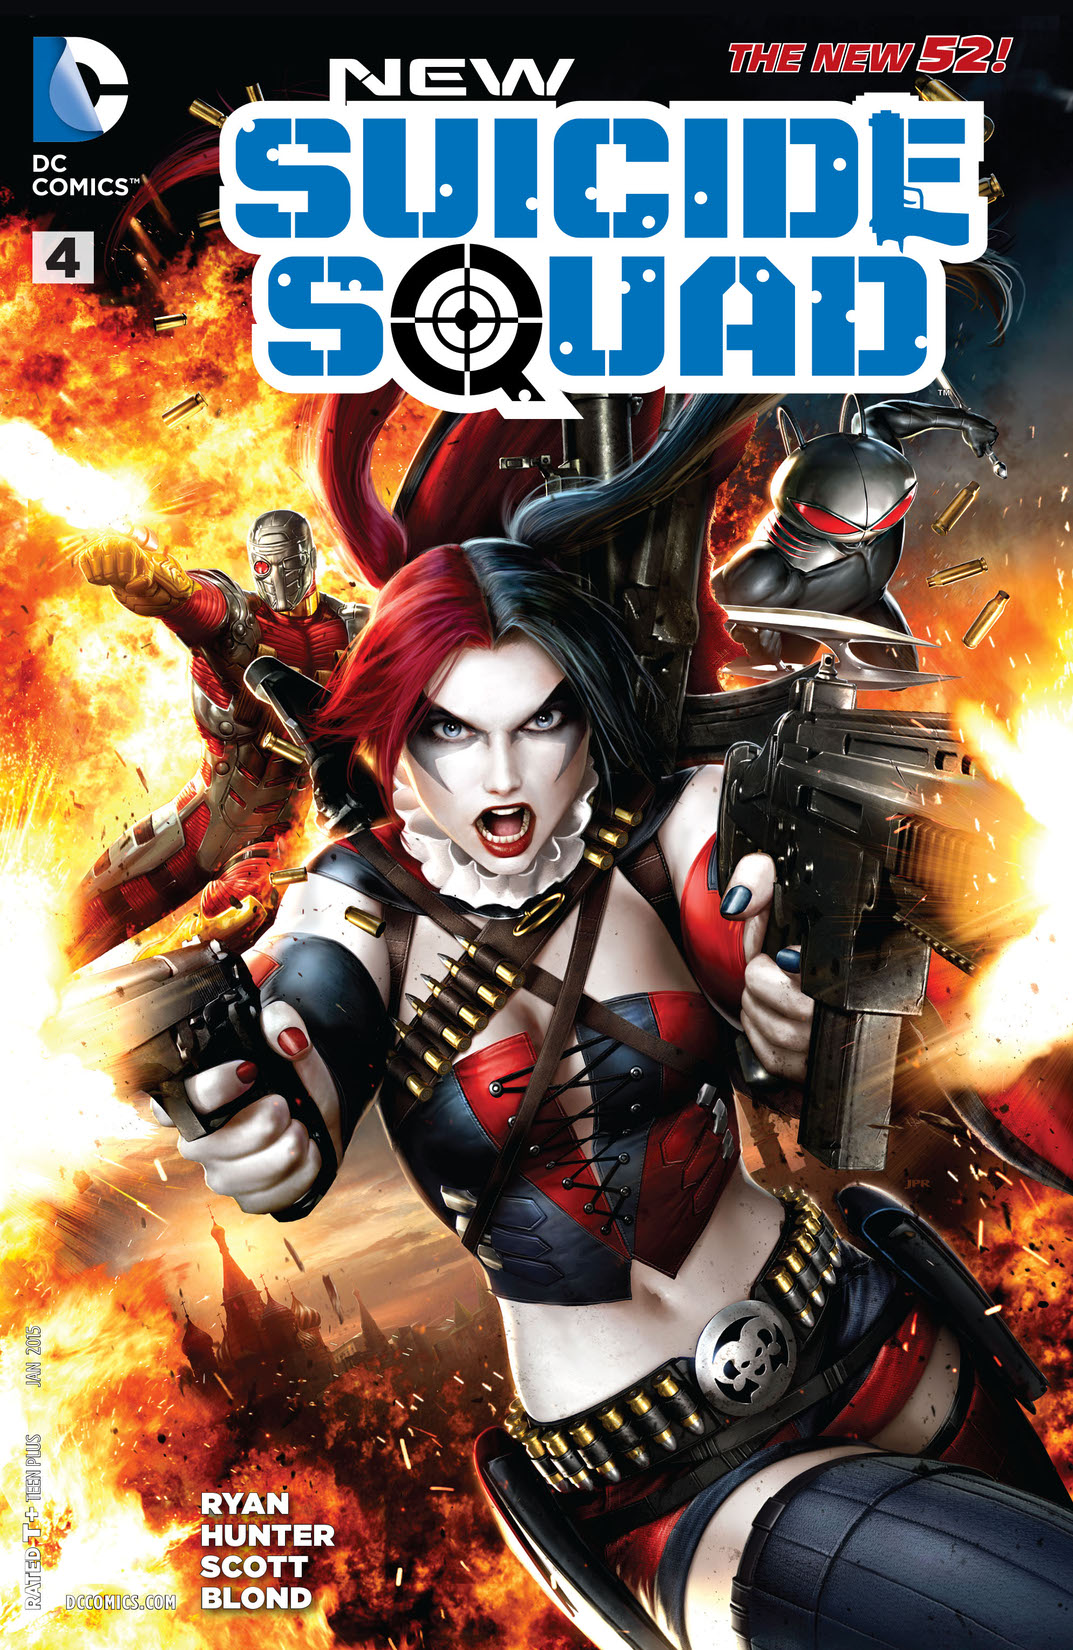 New Suicide Squad #4 preview images